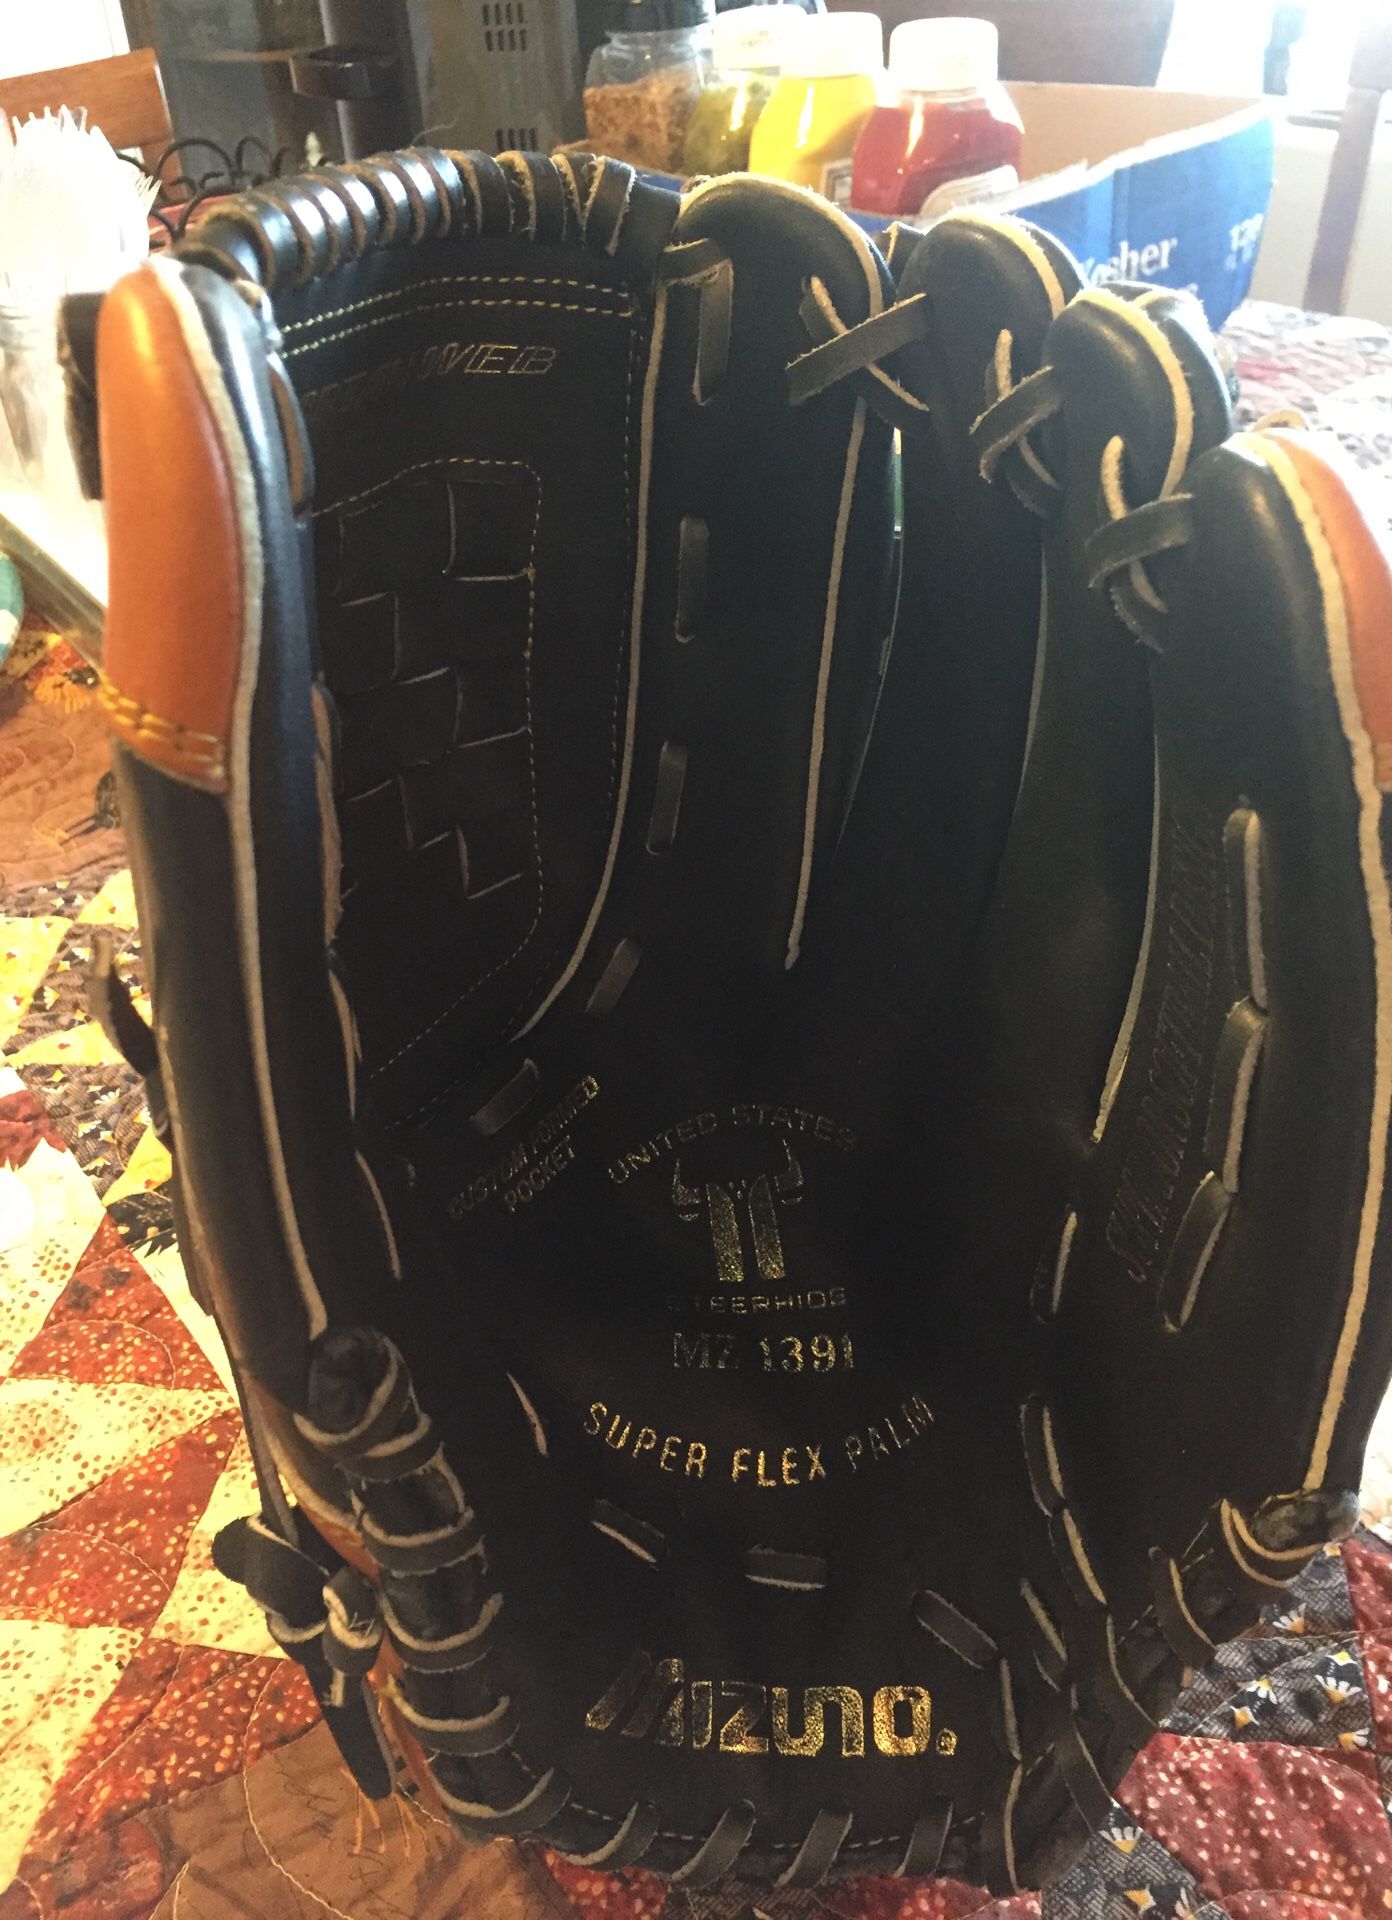 Mizuno softball glove, new, never been used. Model number MZ1391, Superflex palm, cushion performed pocket,